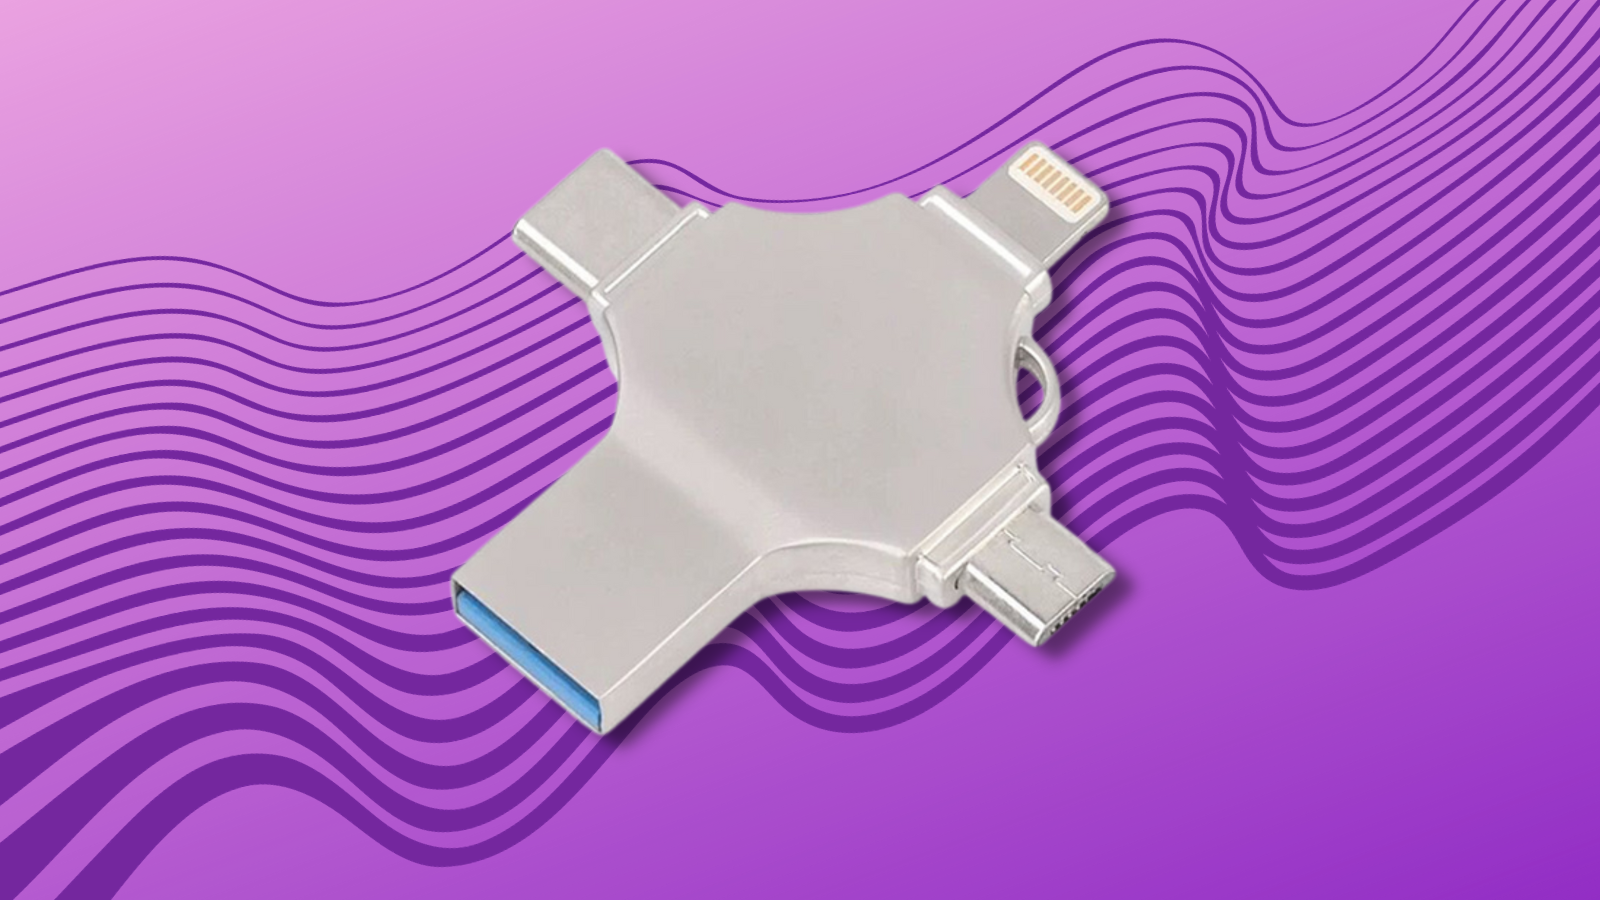 4-in-1 flash drive with purple squiggle background